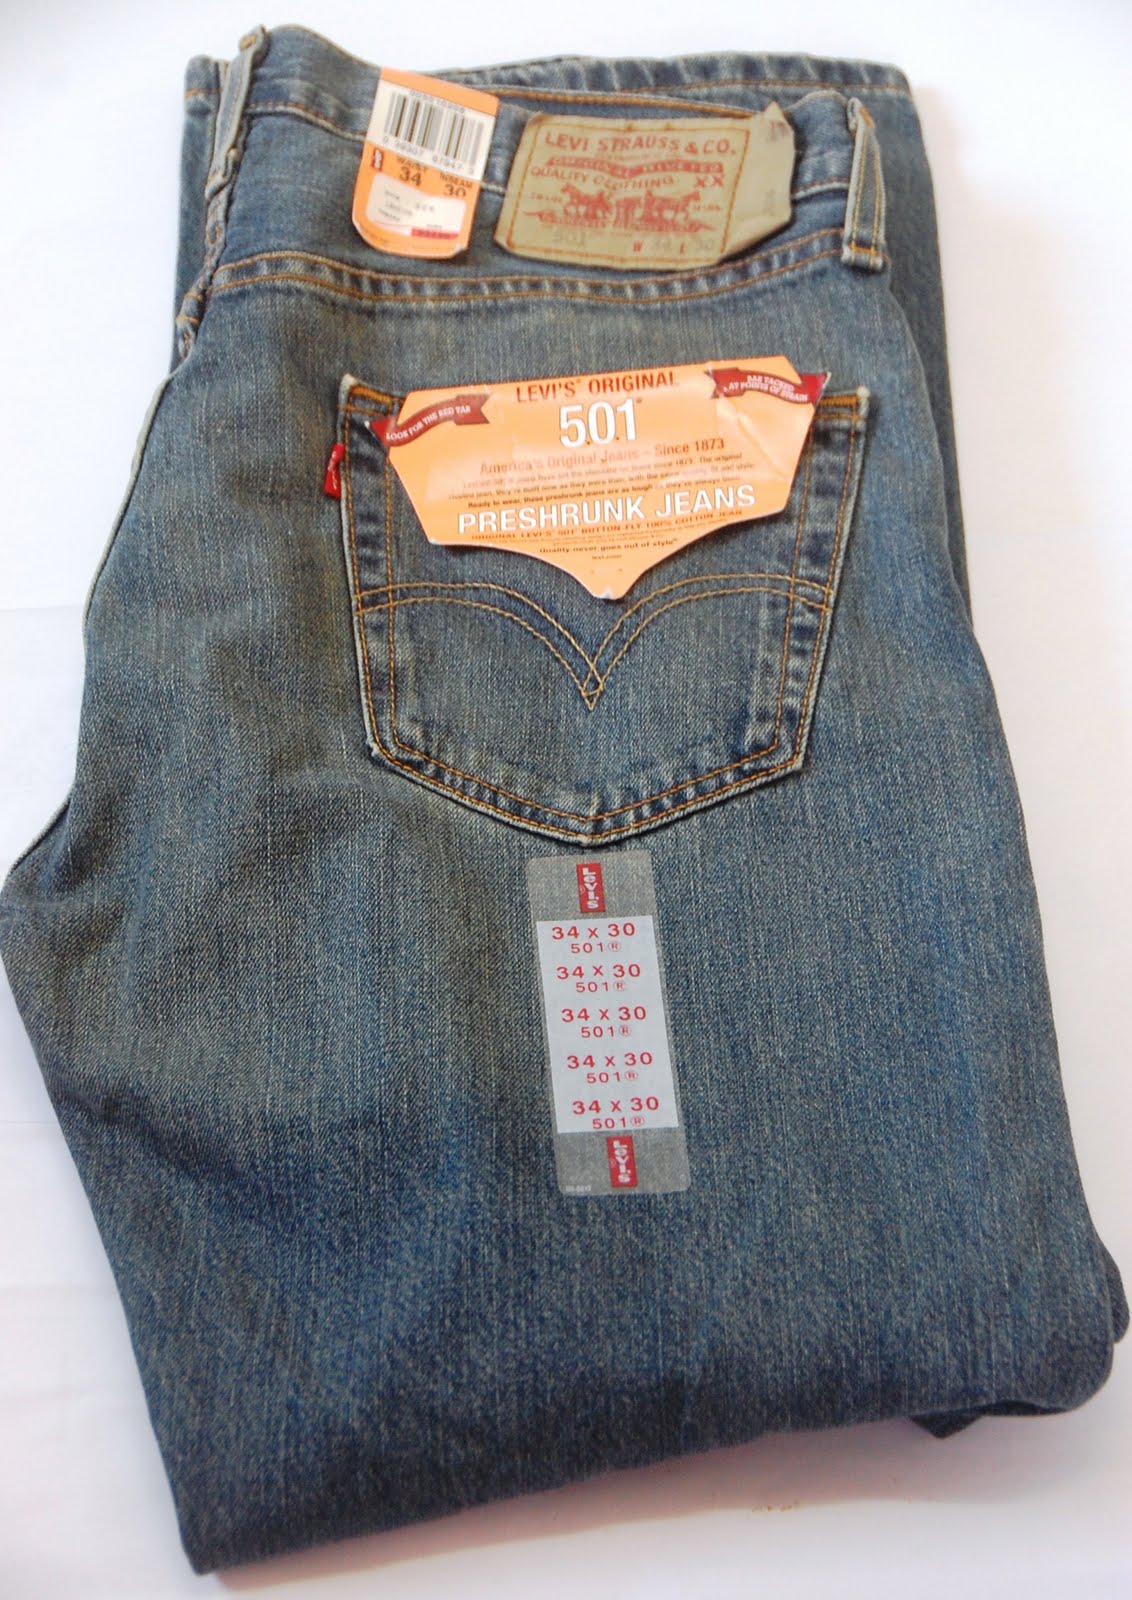 from-usa-with-love-original-levi-s-jean-501